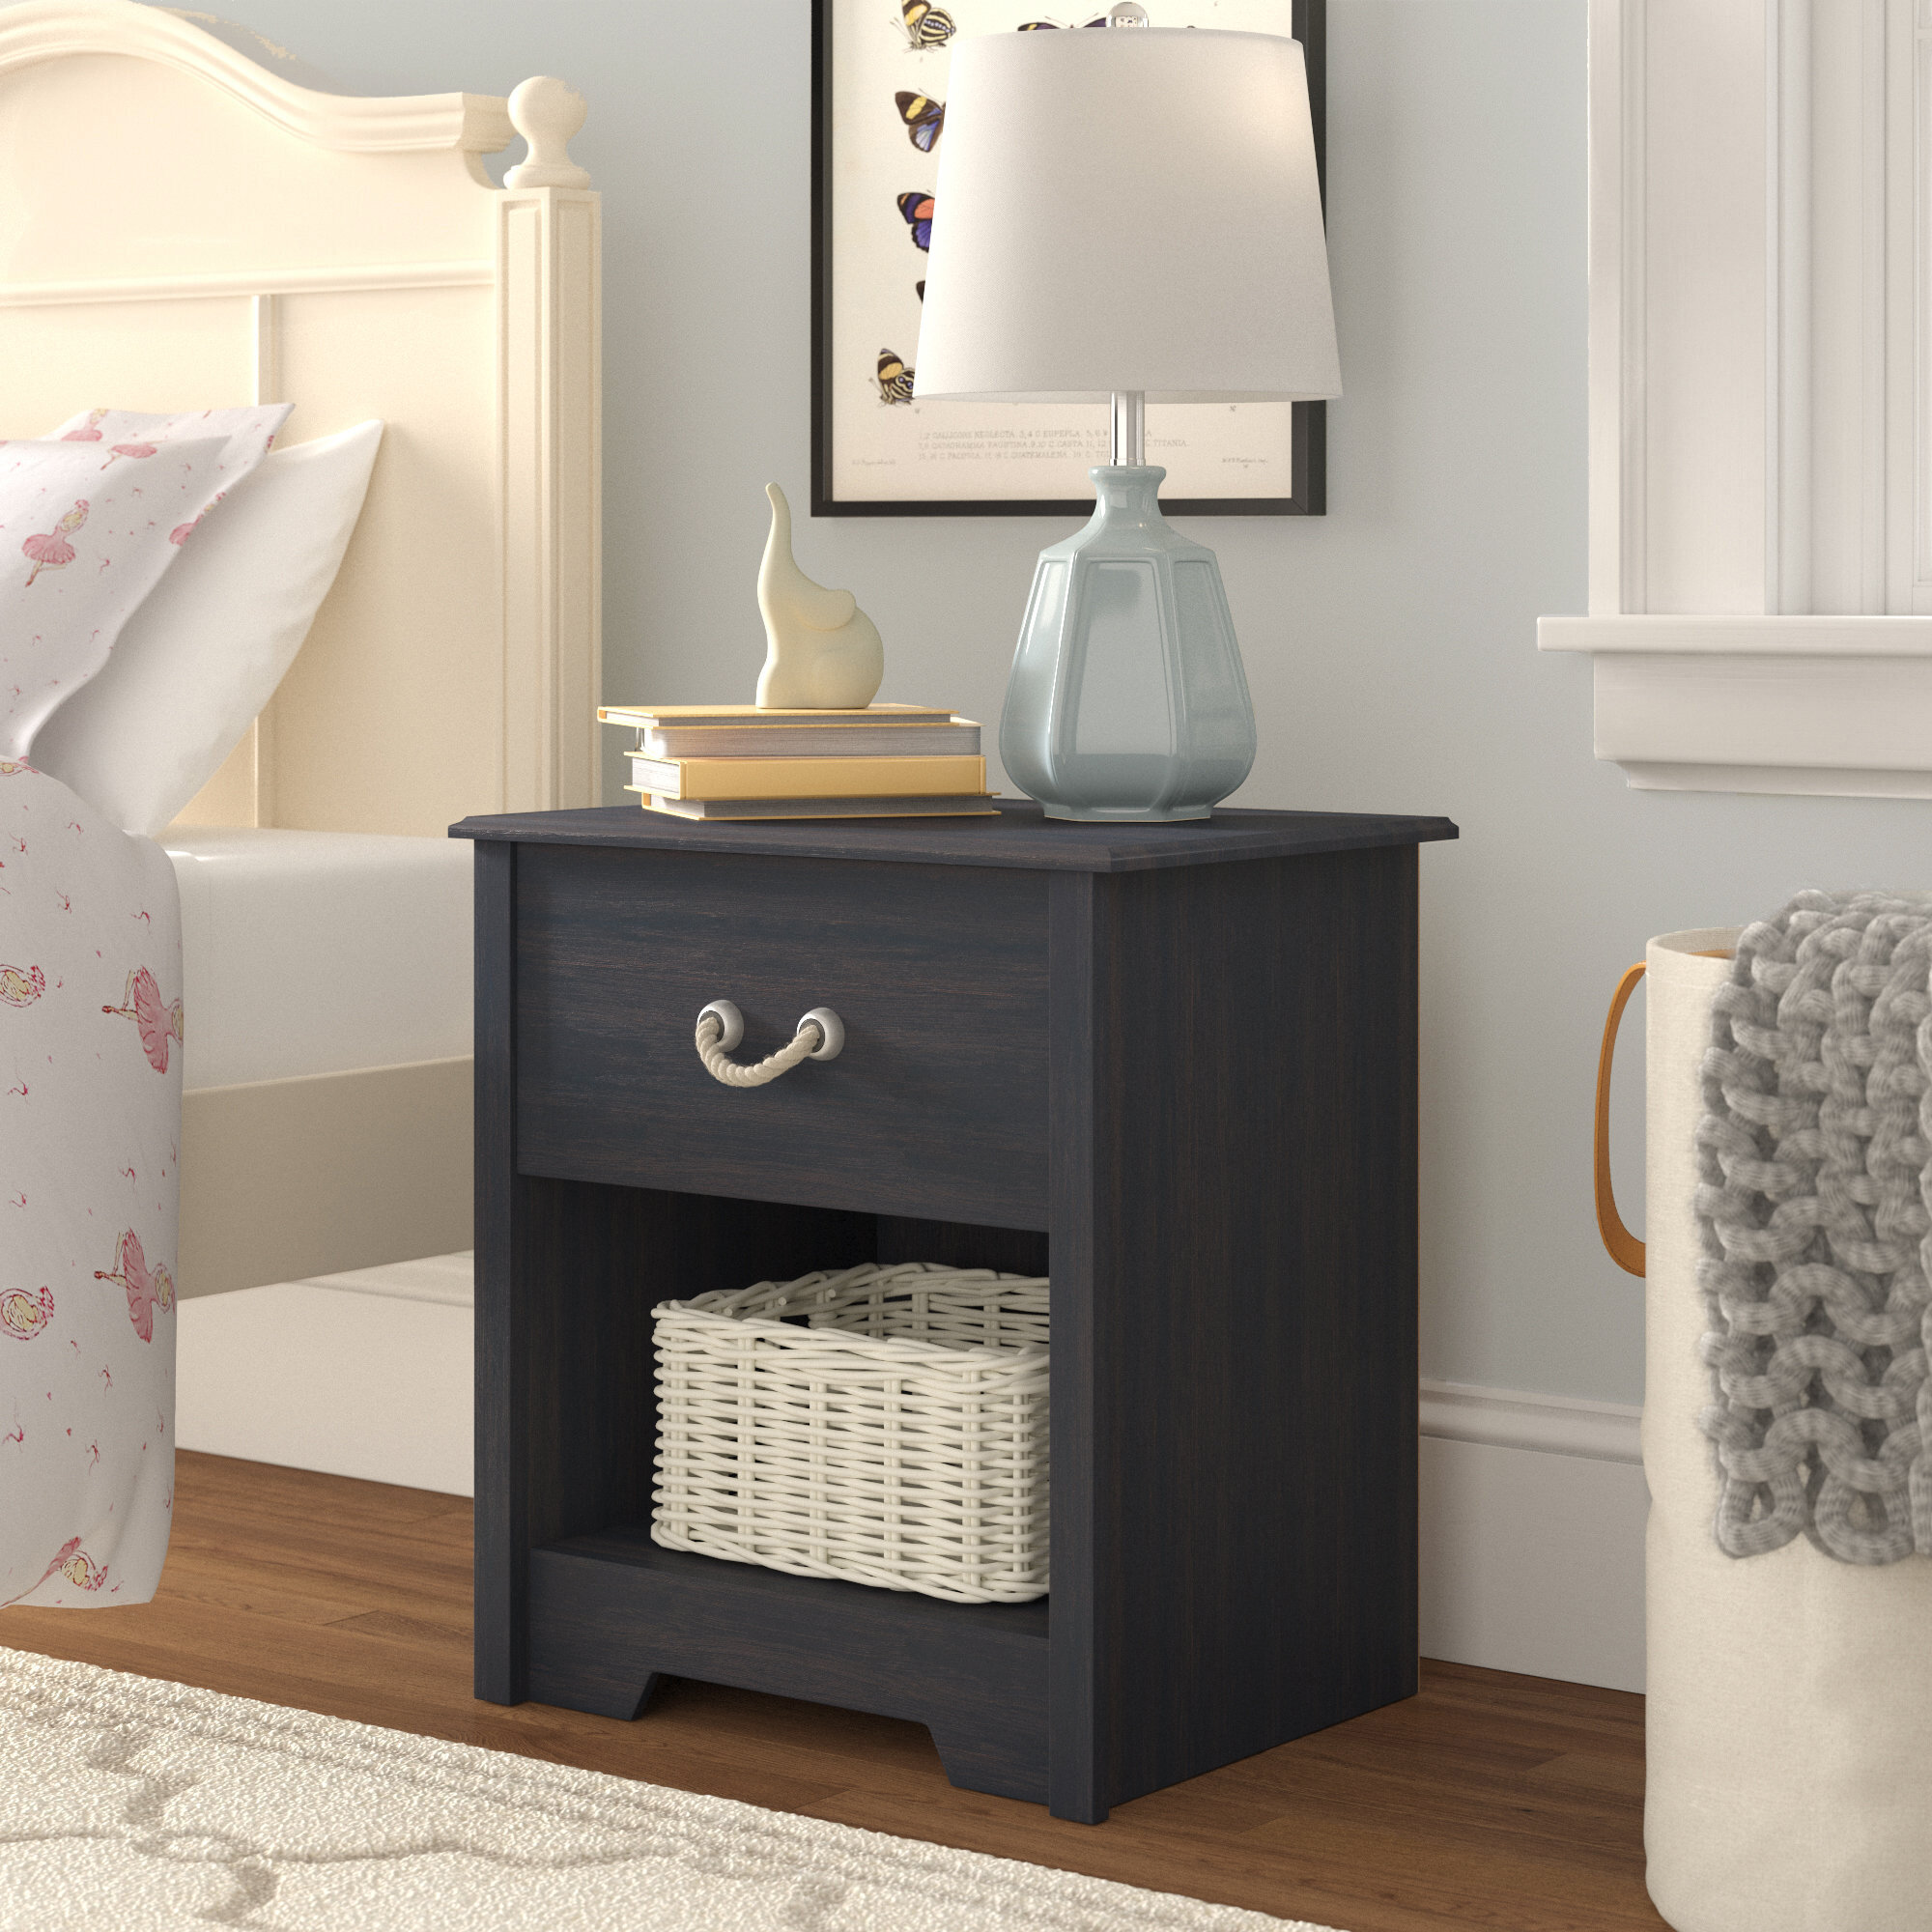 2 Drawers Details about   Bedside Night Table Sleek & Style Small Kids Dresser for Bedroom 